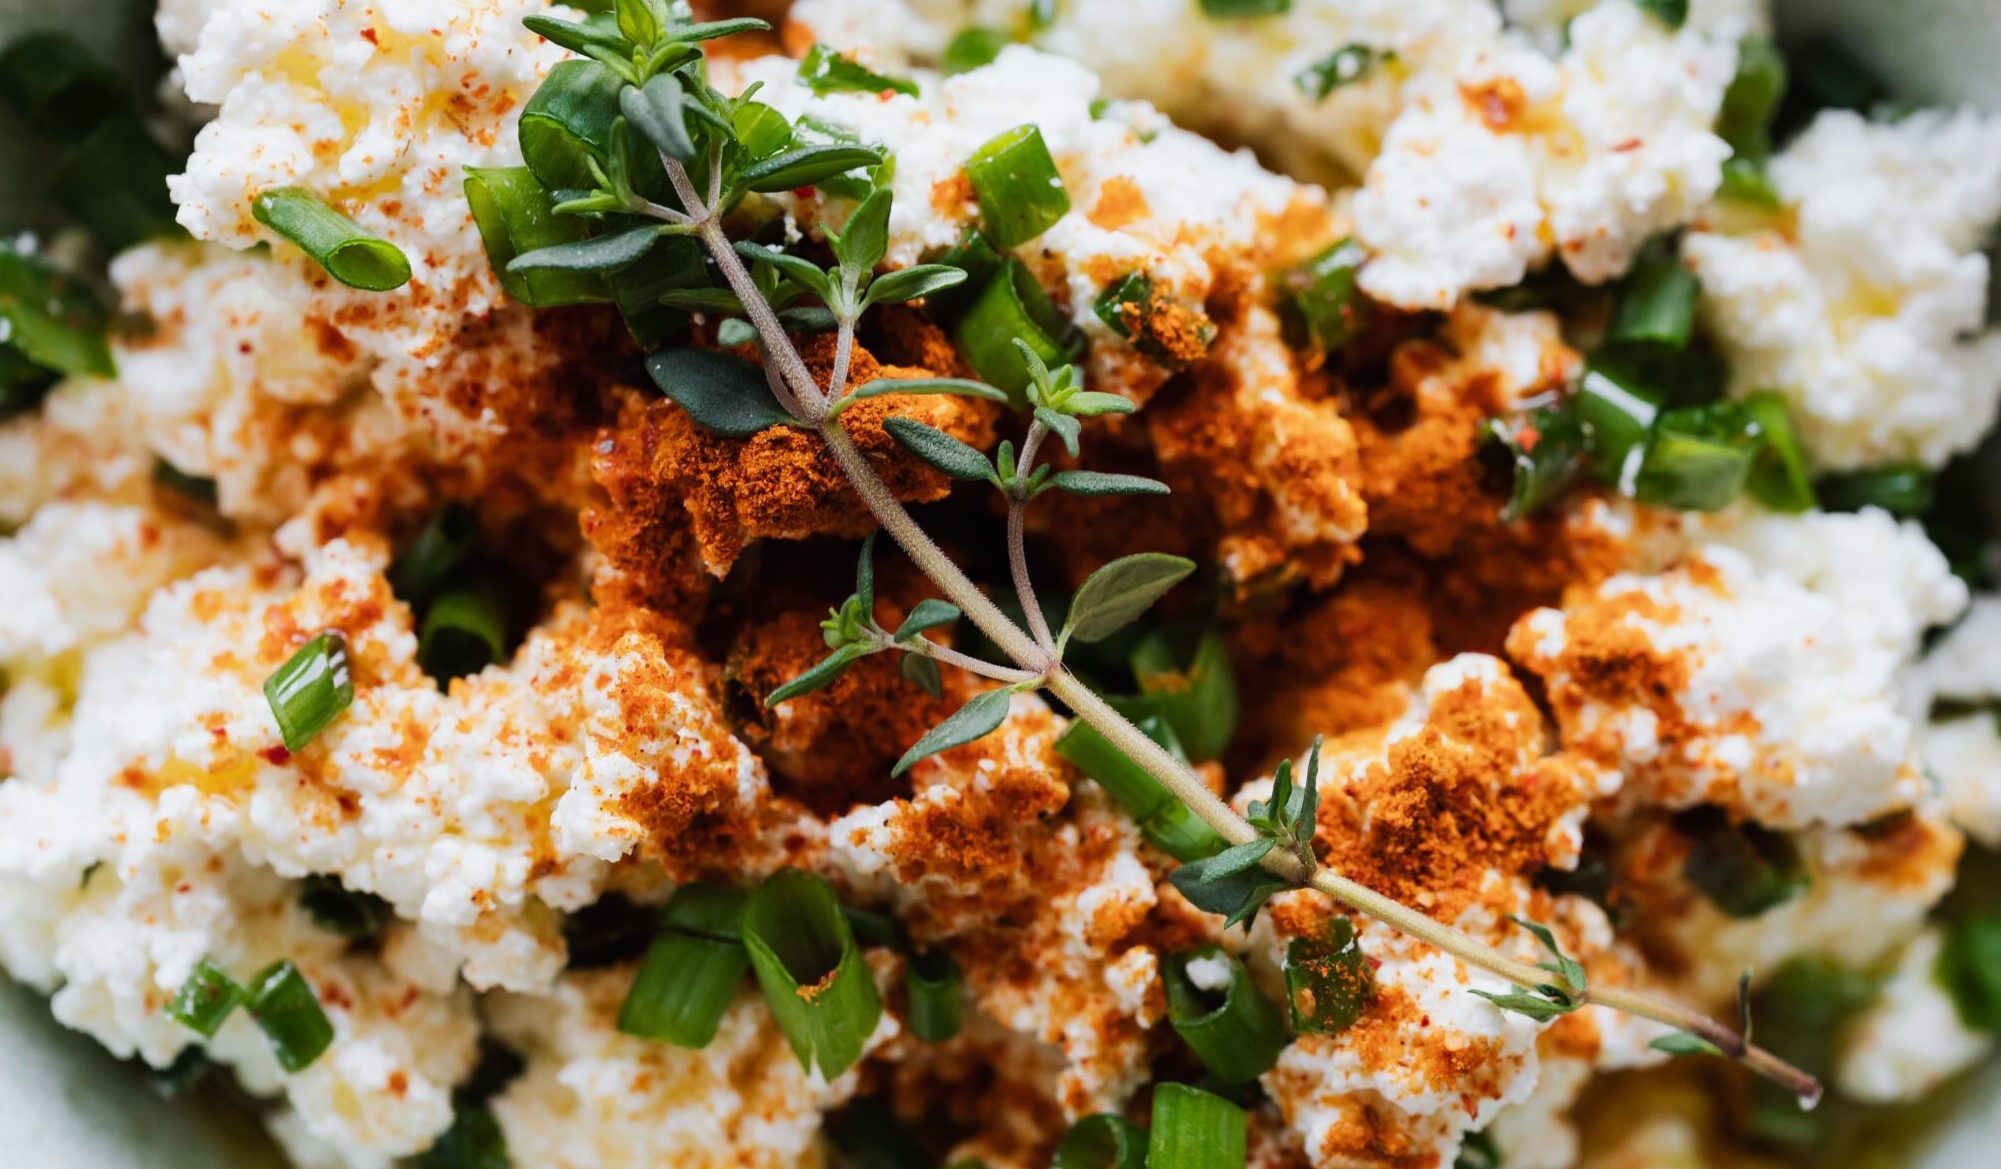 Cottage cheese with spices and herbs